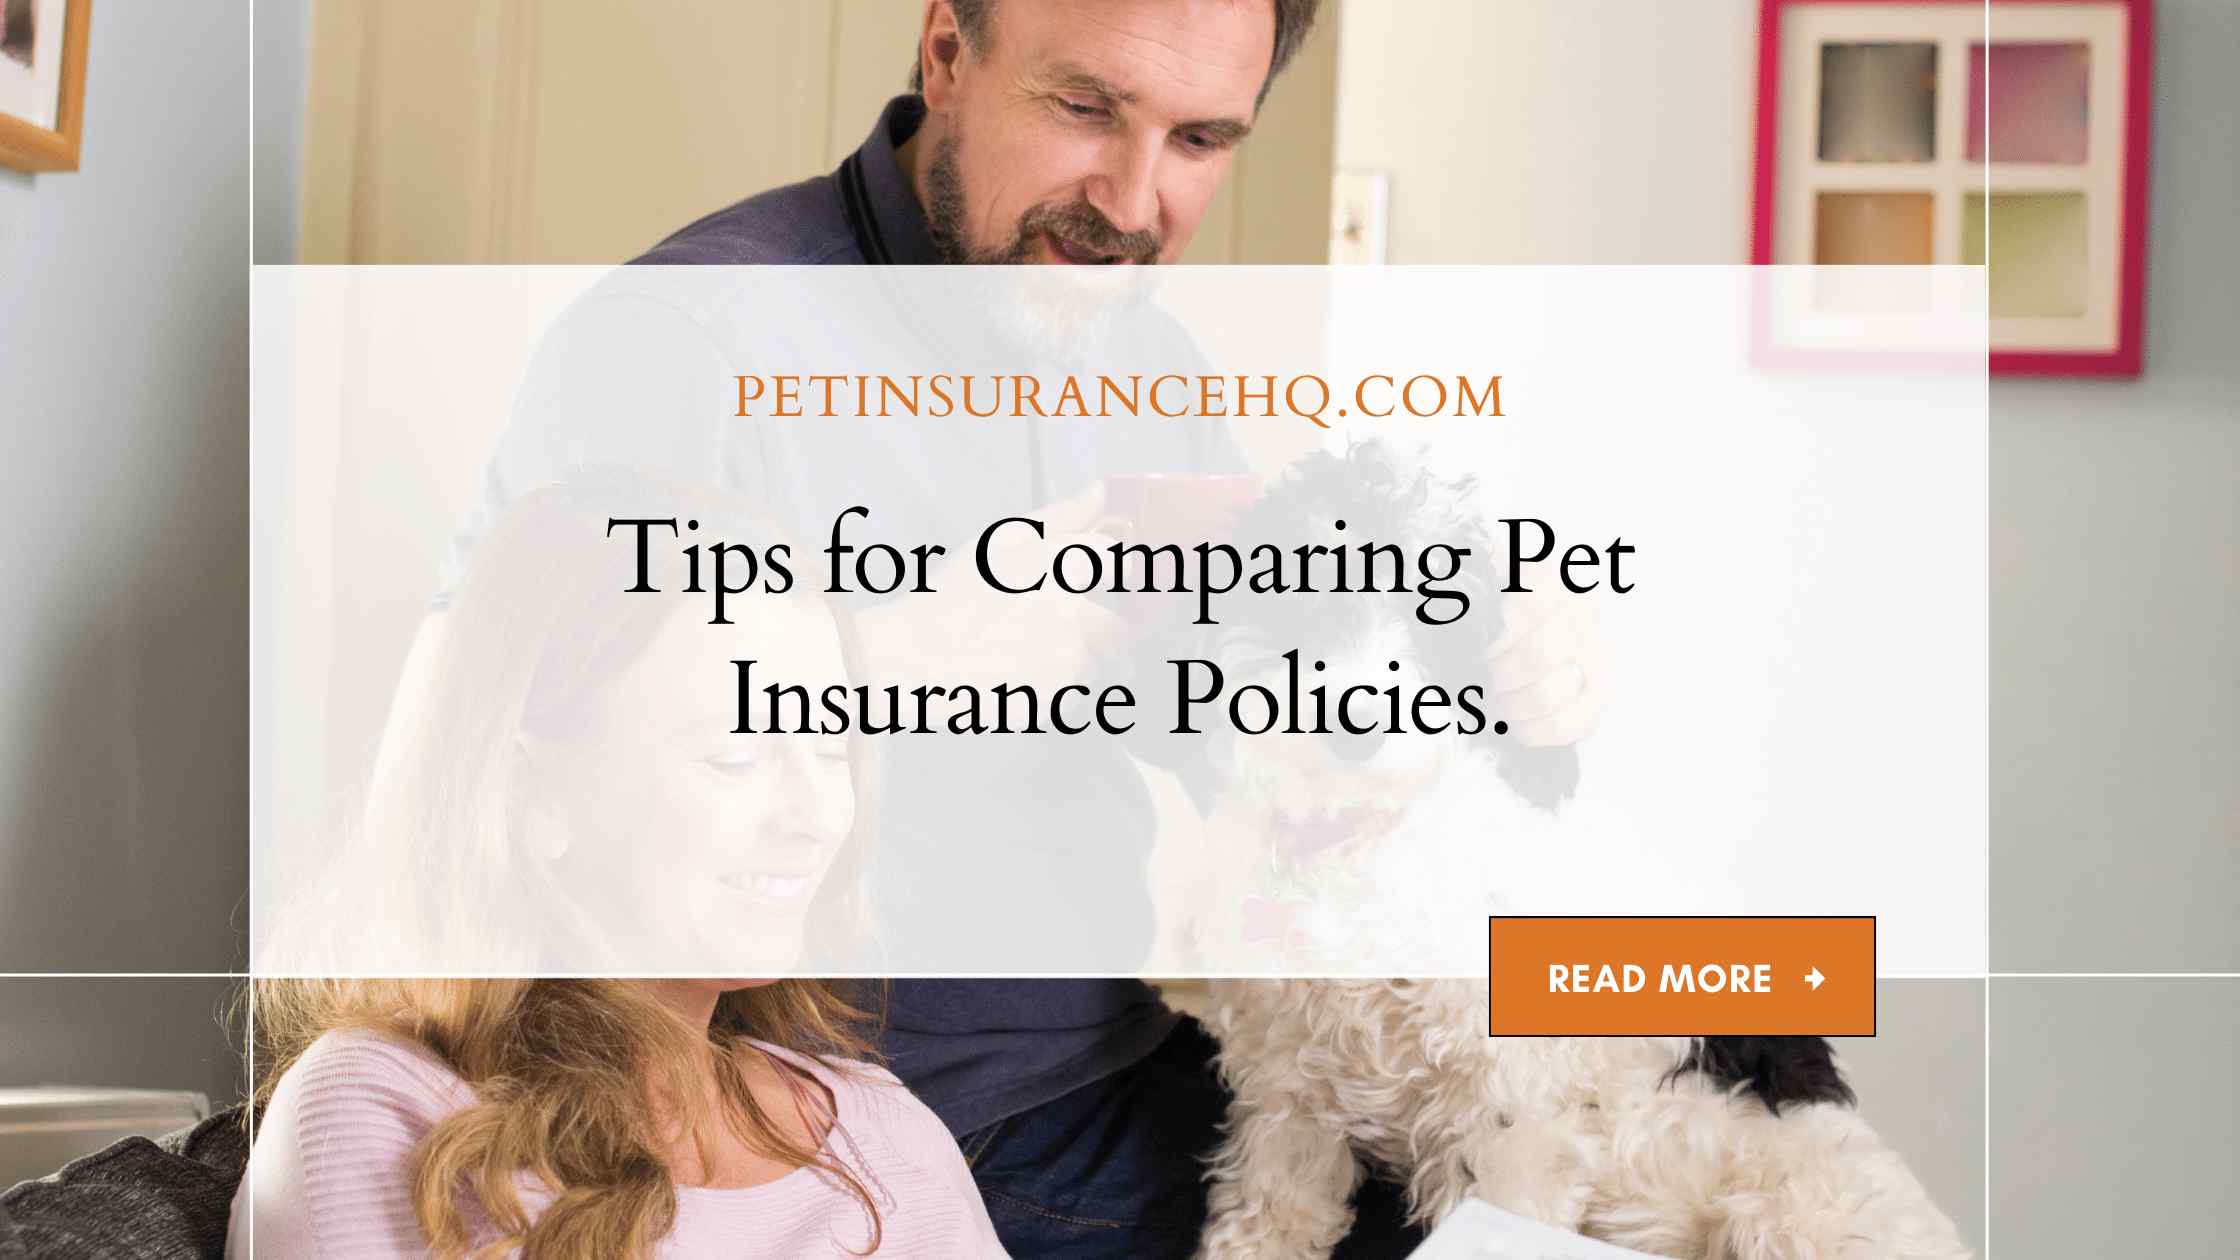 Comparing Pet Insurance Policies: What to Look For